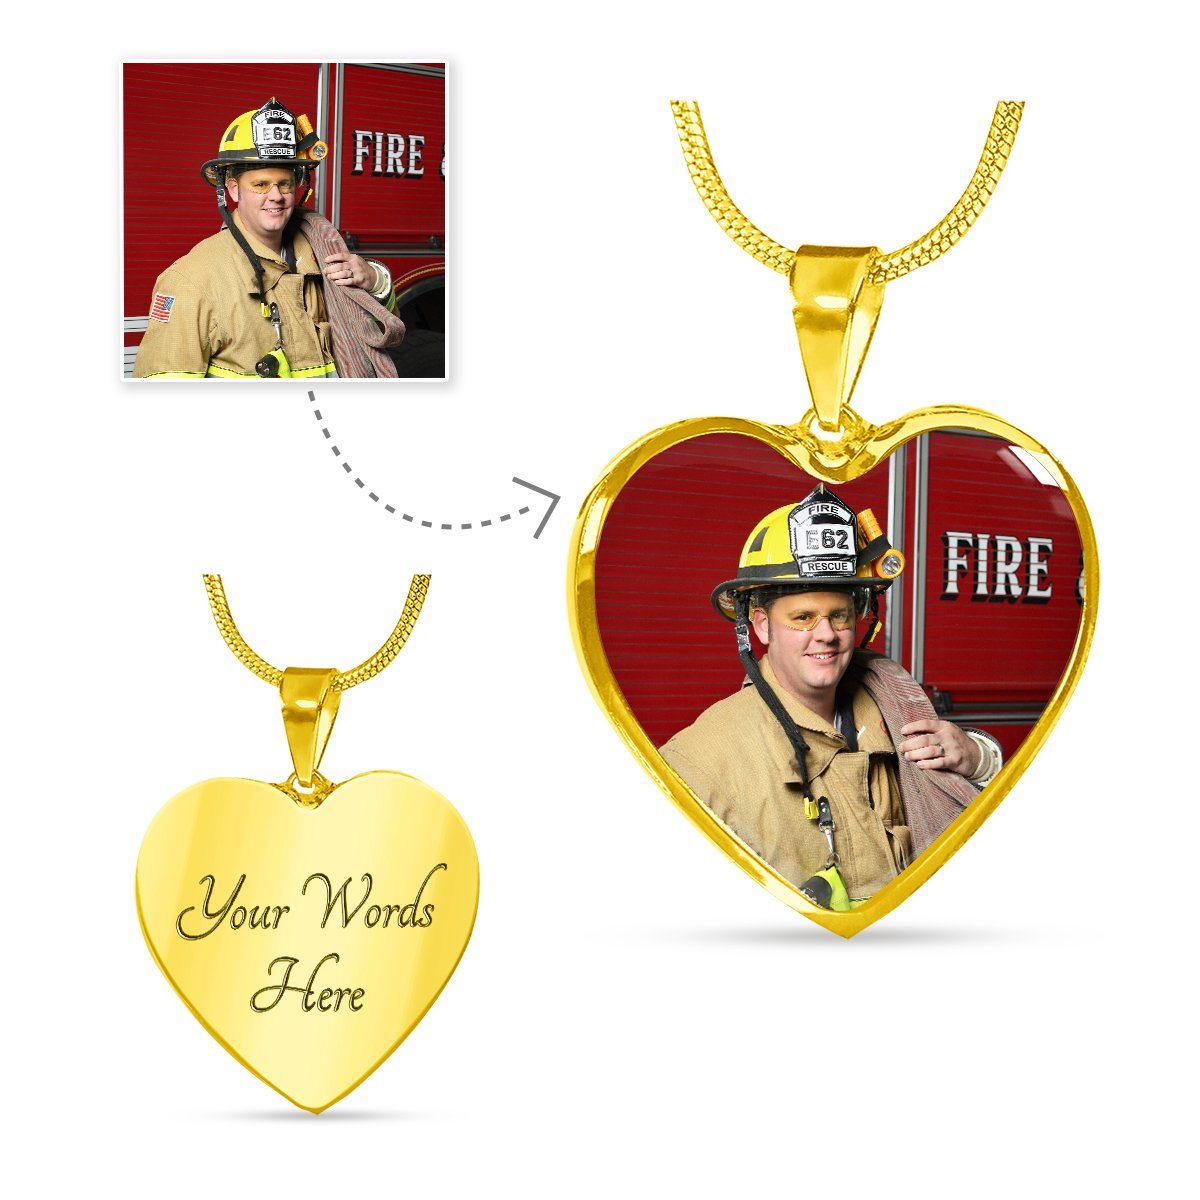 Firefighter Personalized Photo Heart Necklace - Heroic Defender